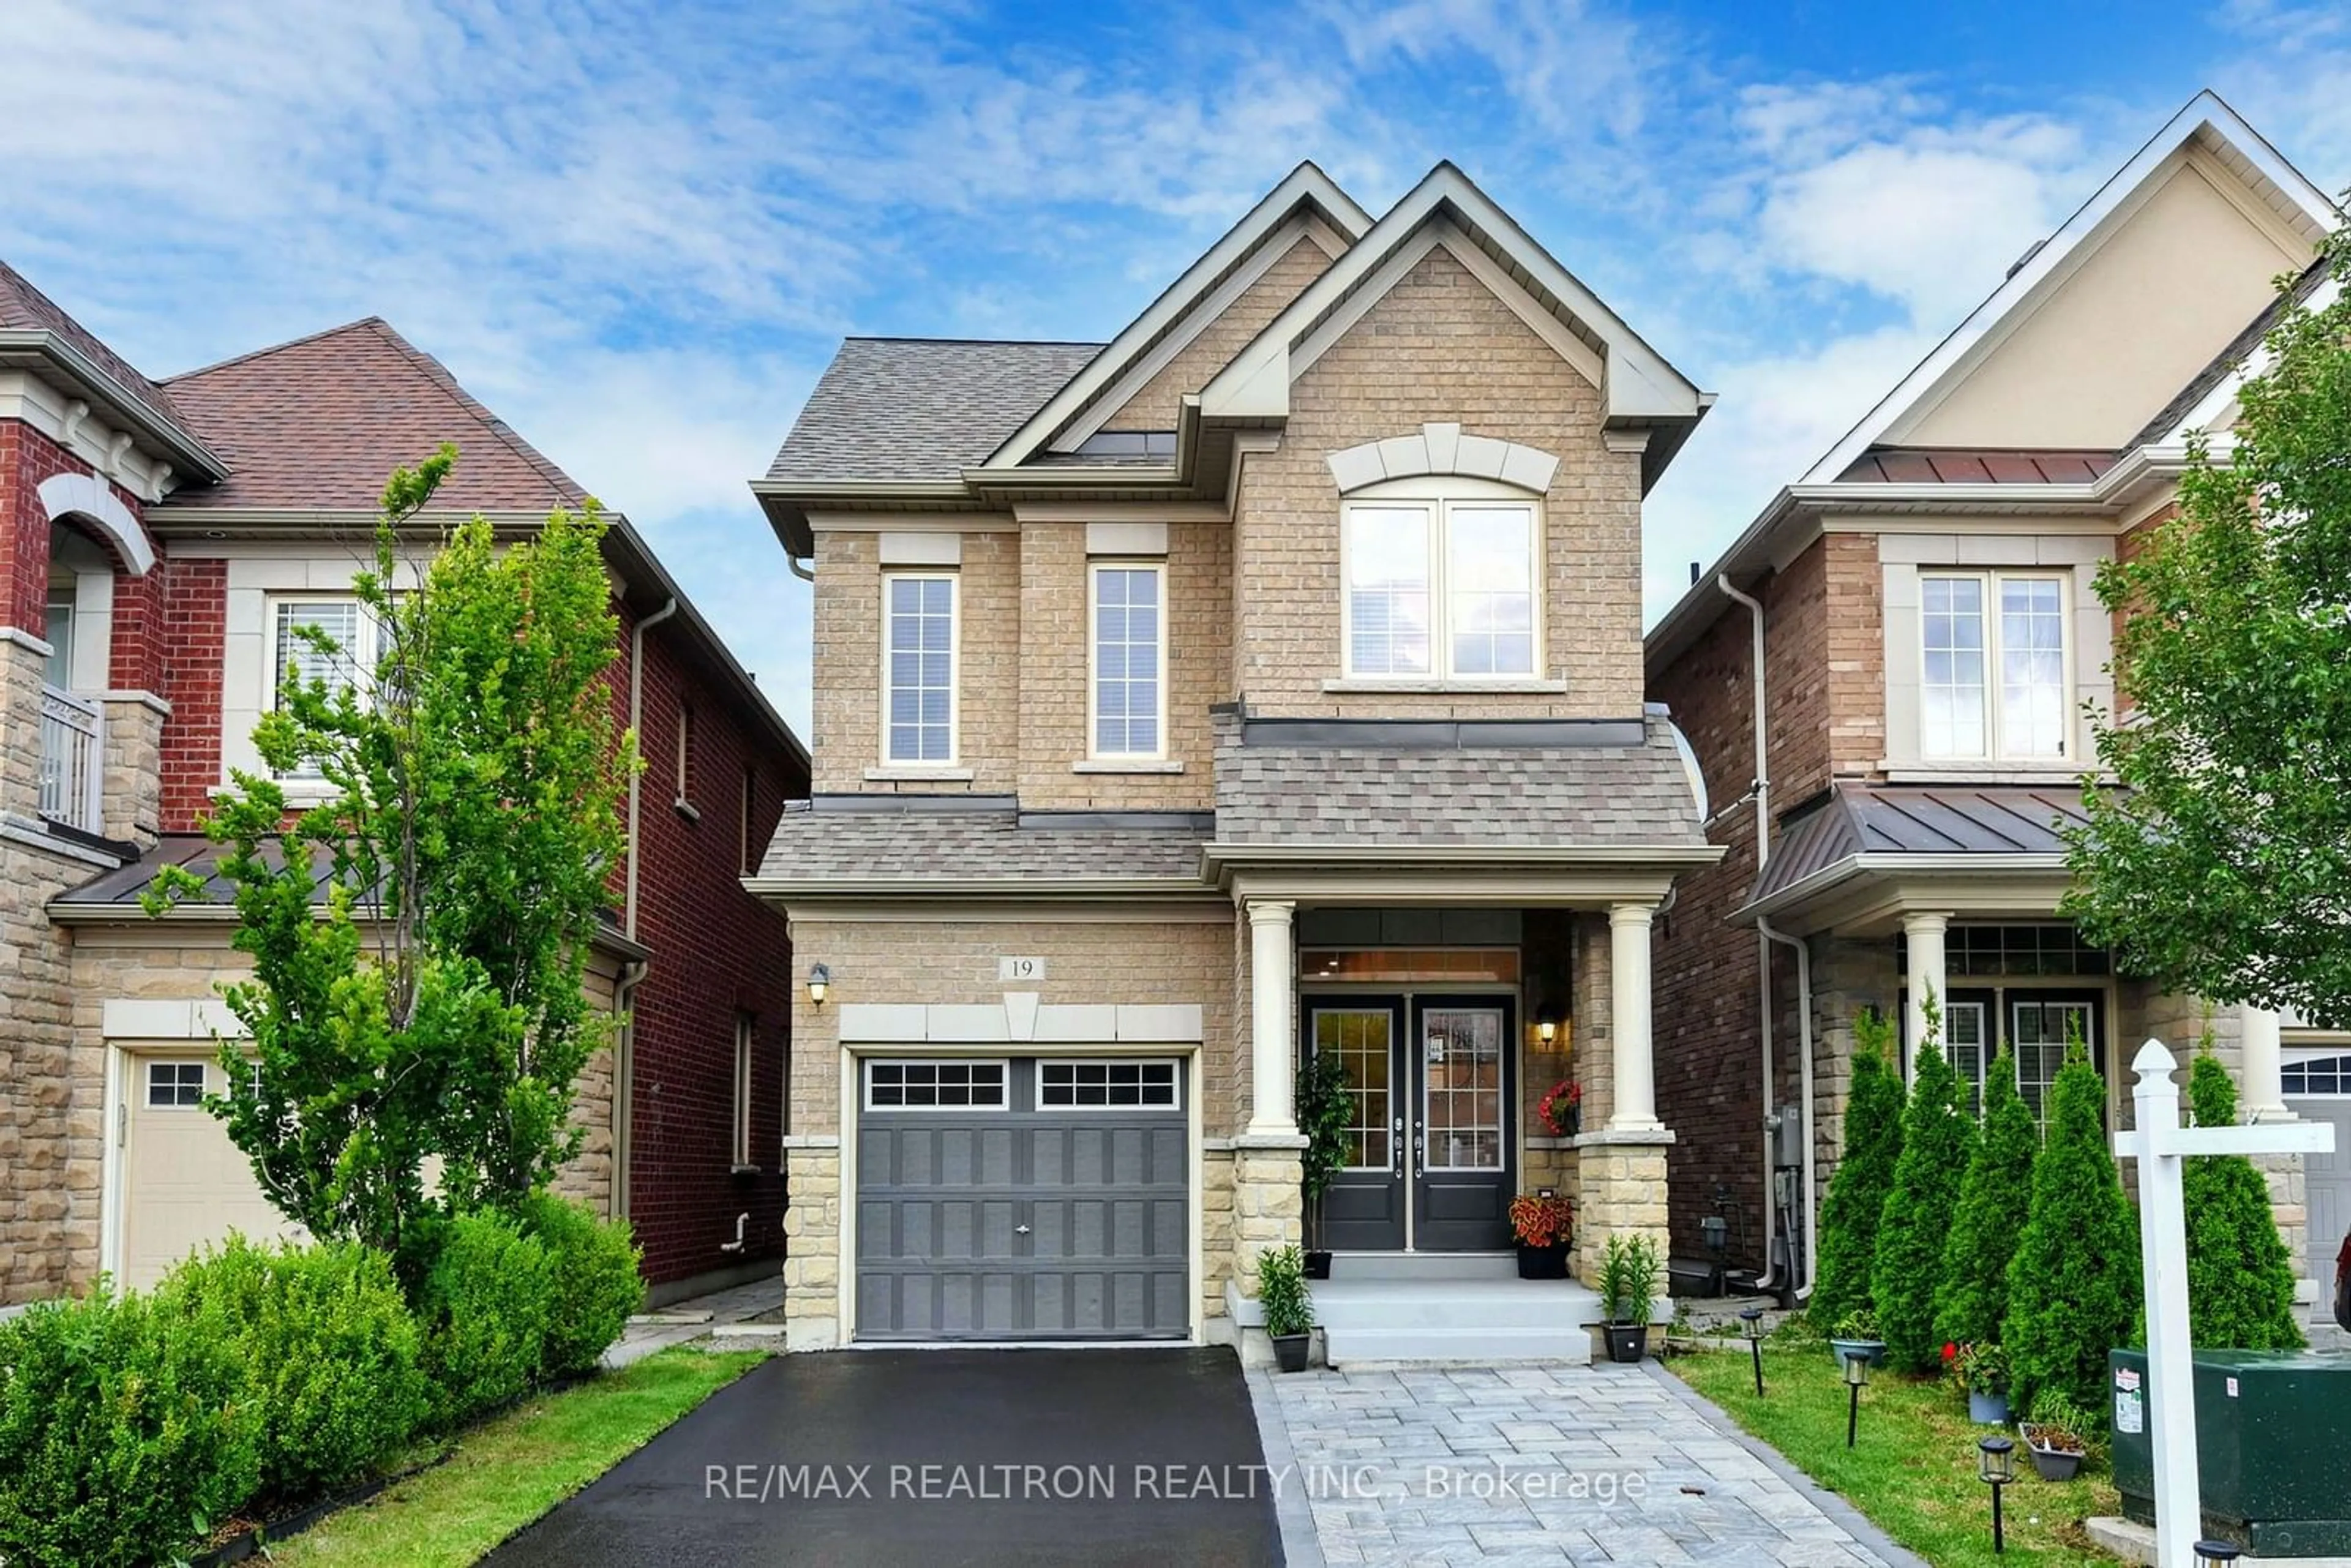 Home with brick exterior material for 19 Hatton Garden Rd, Vaughan Ontario L4H 3R1